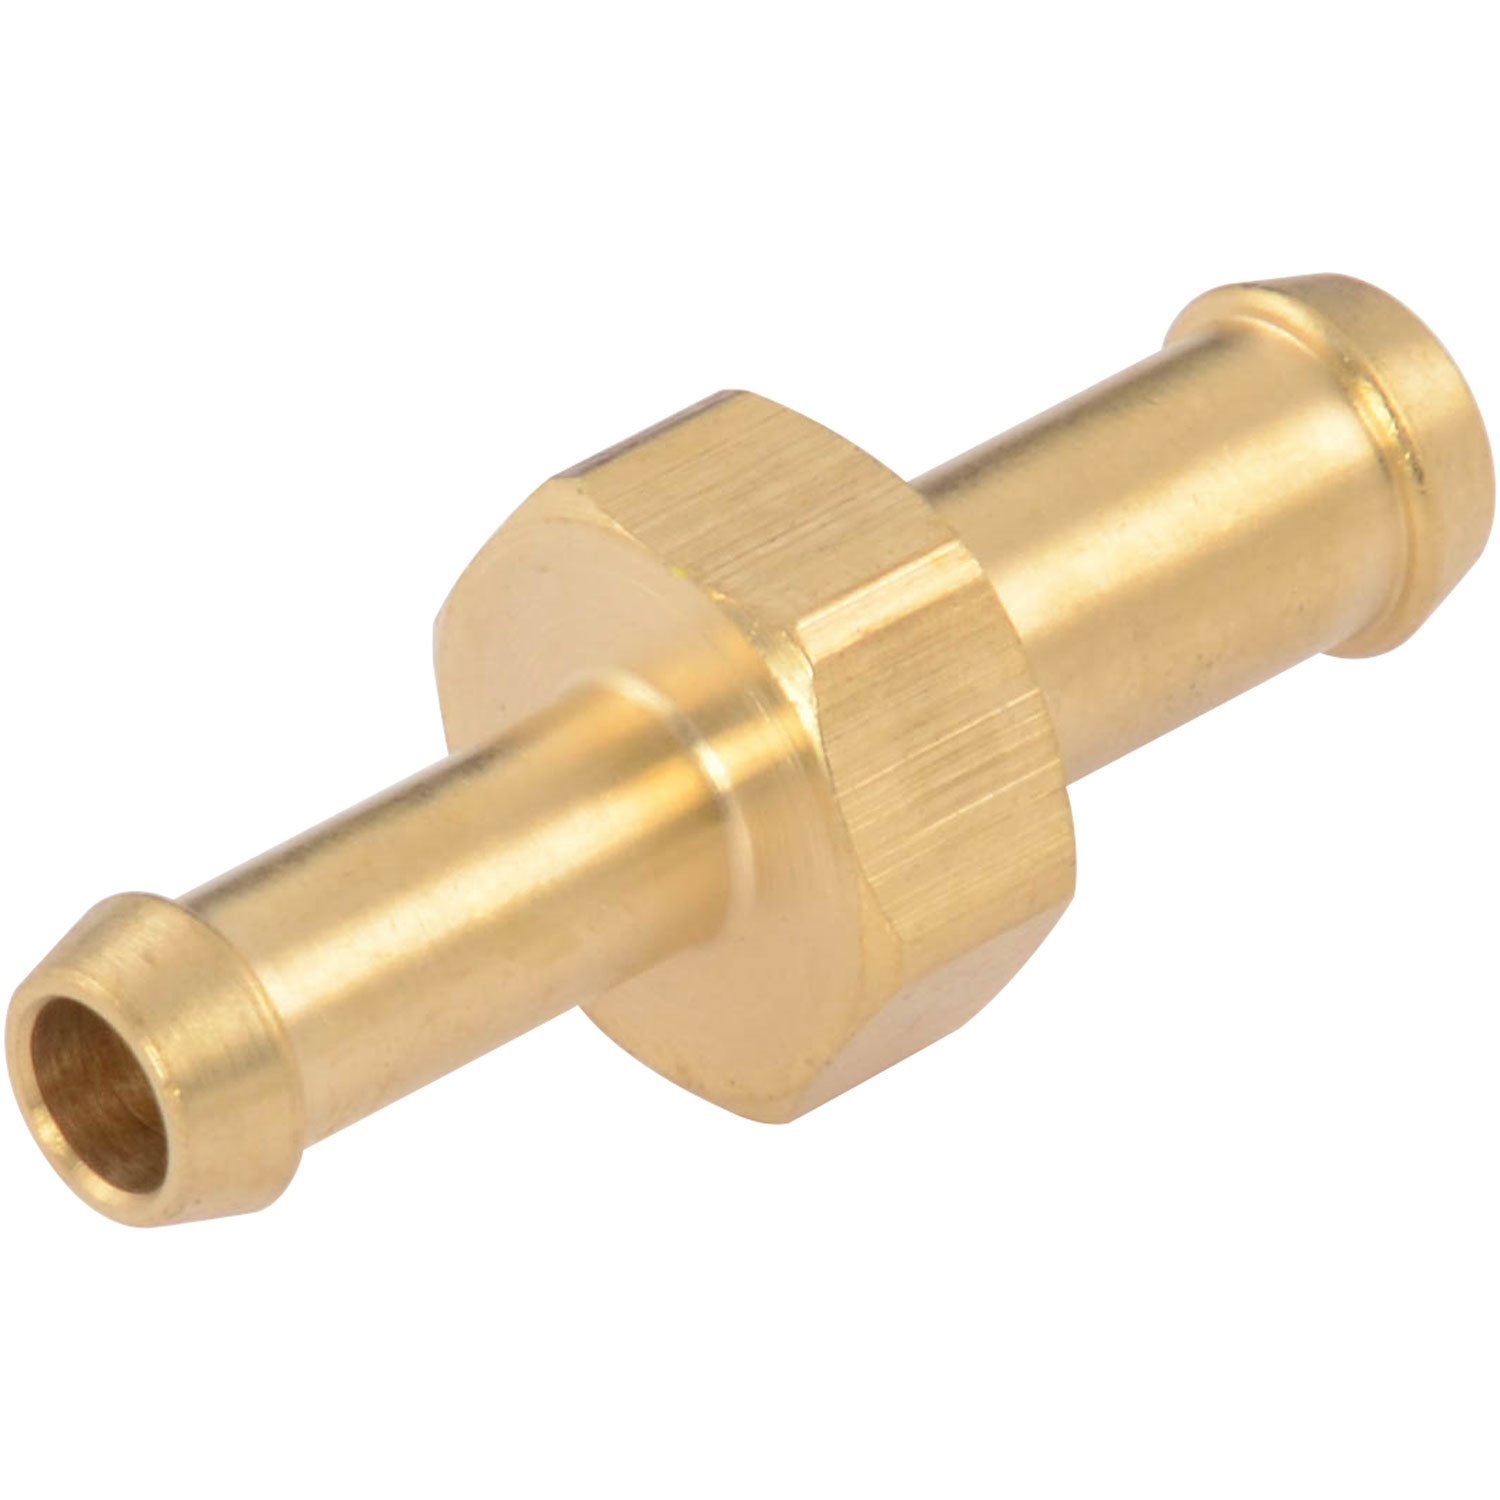 Brass Hose Adapter for 5/16 in. to 1/4 in. Hose